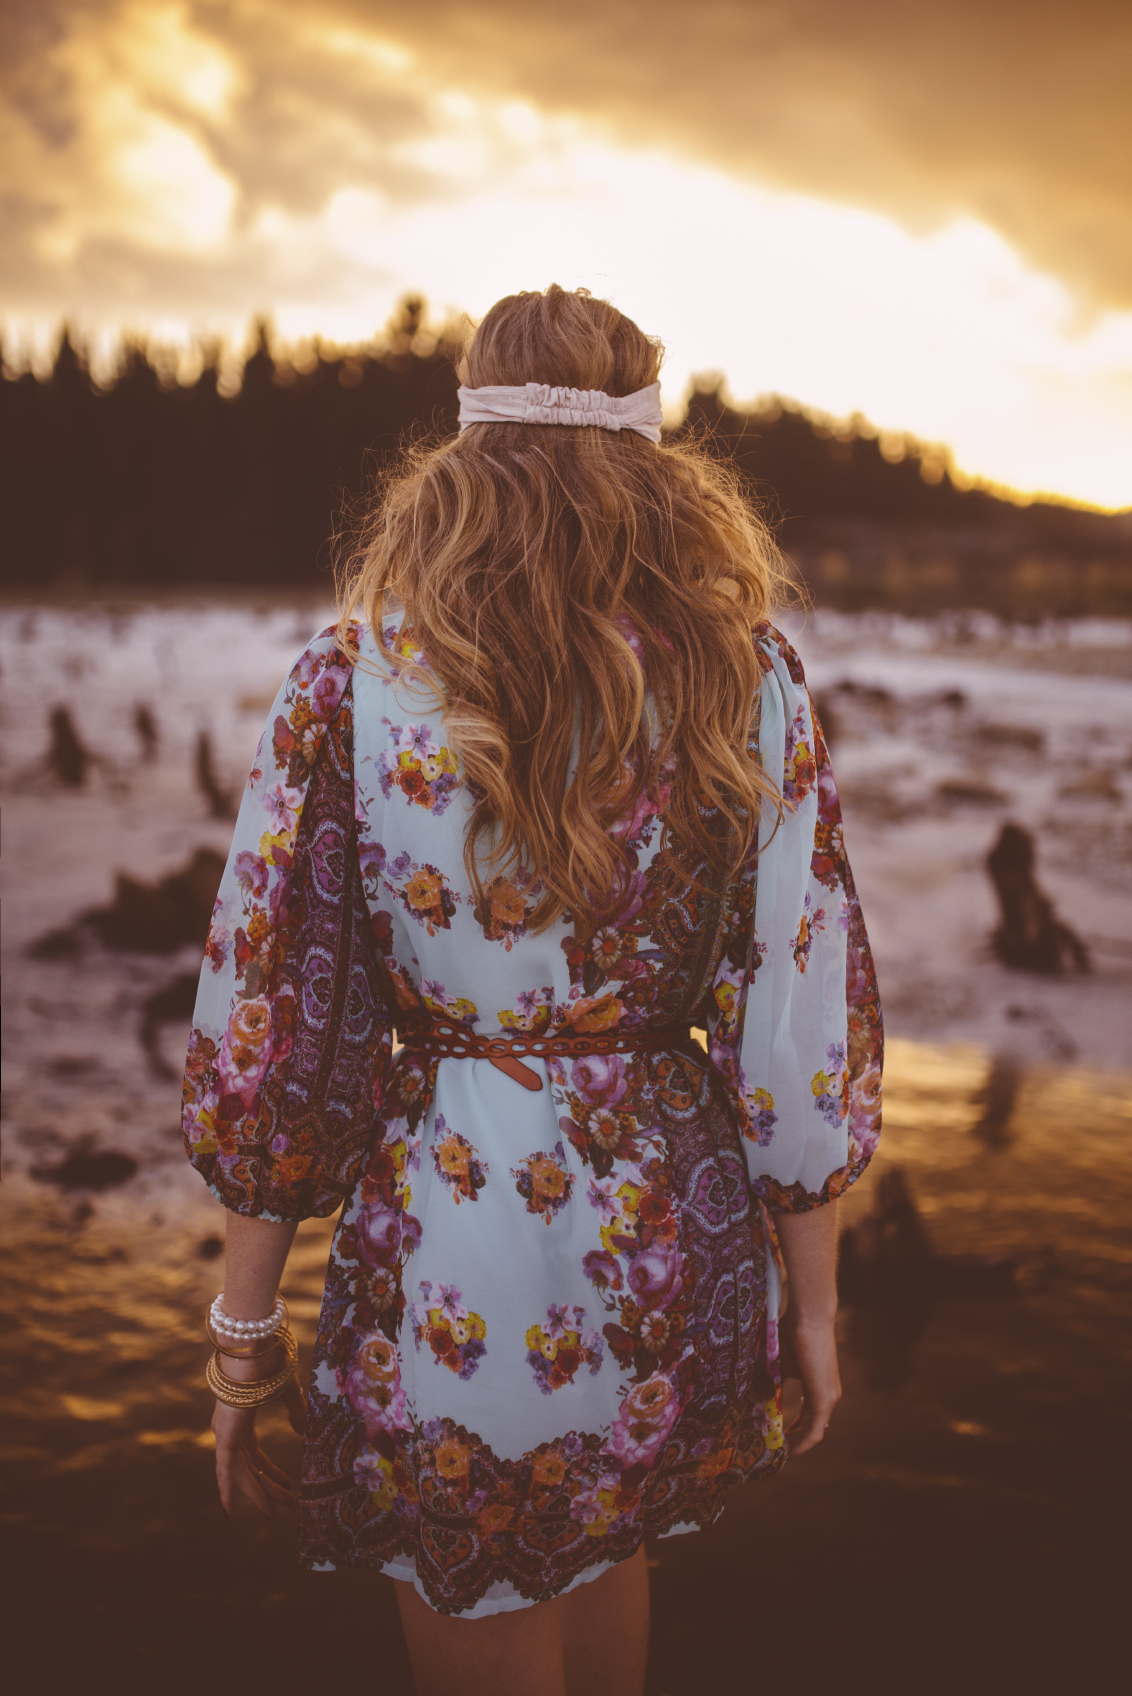 Rearview of a boho girl wearing a floral dress walking through water in nature at sunset